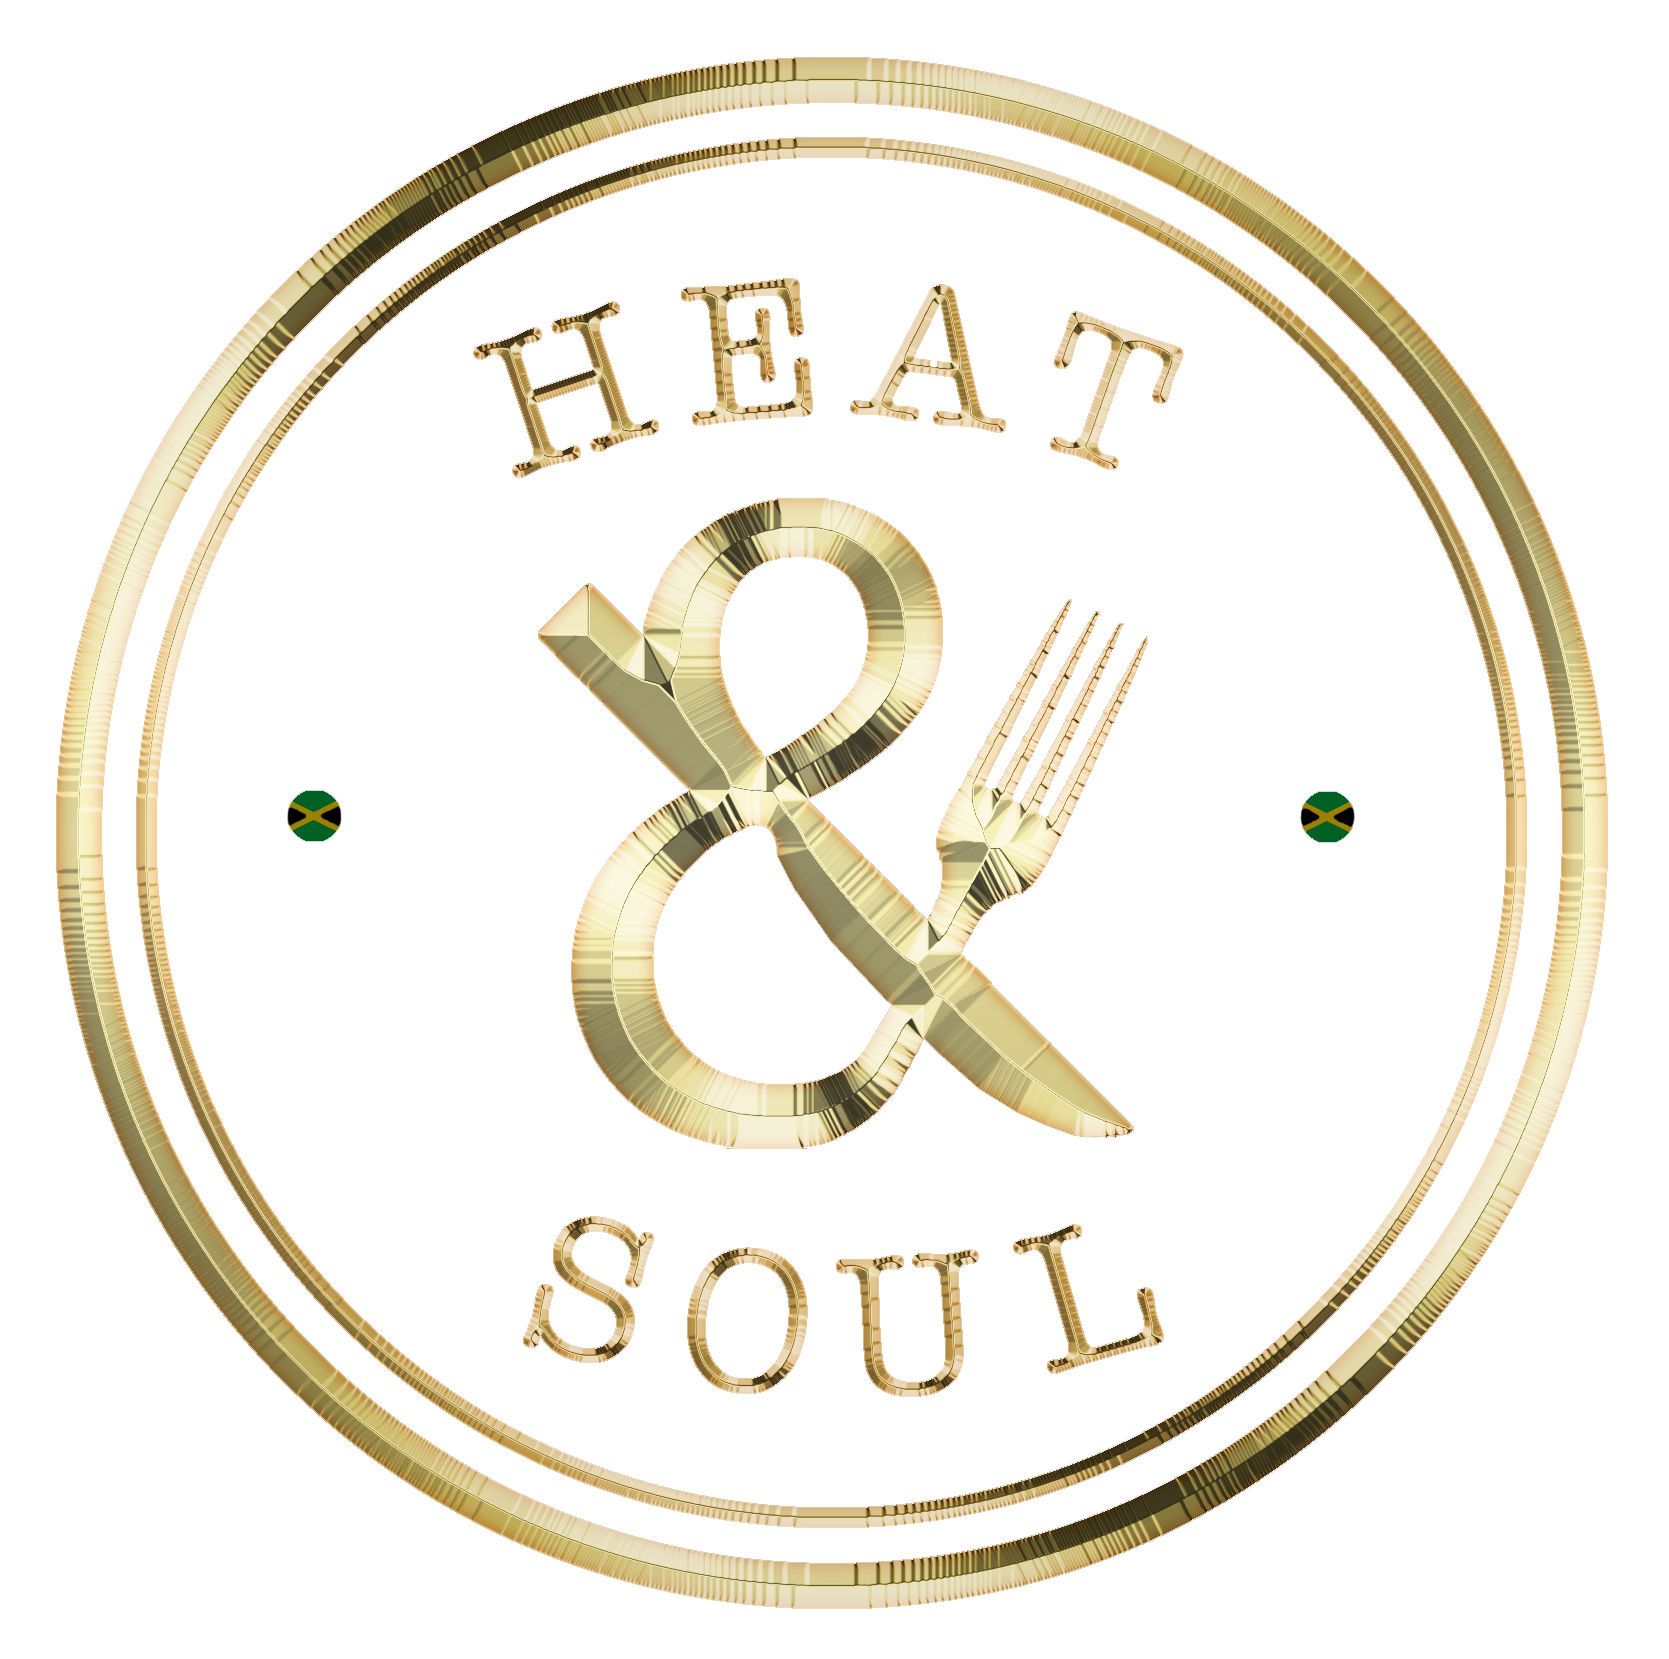 Heat and Soul